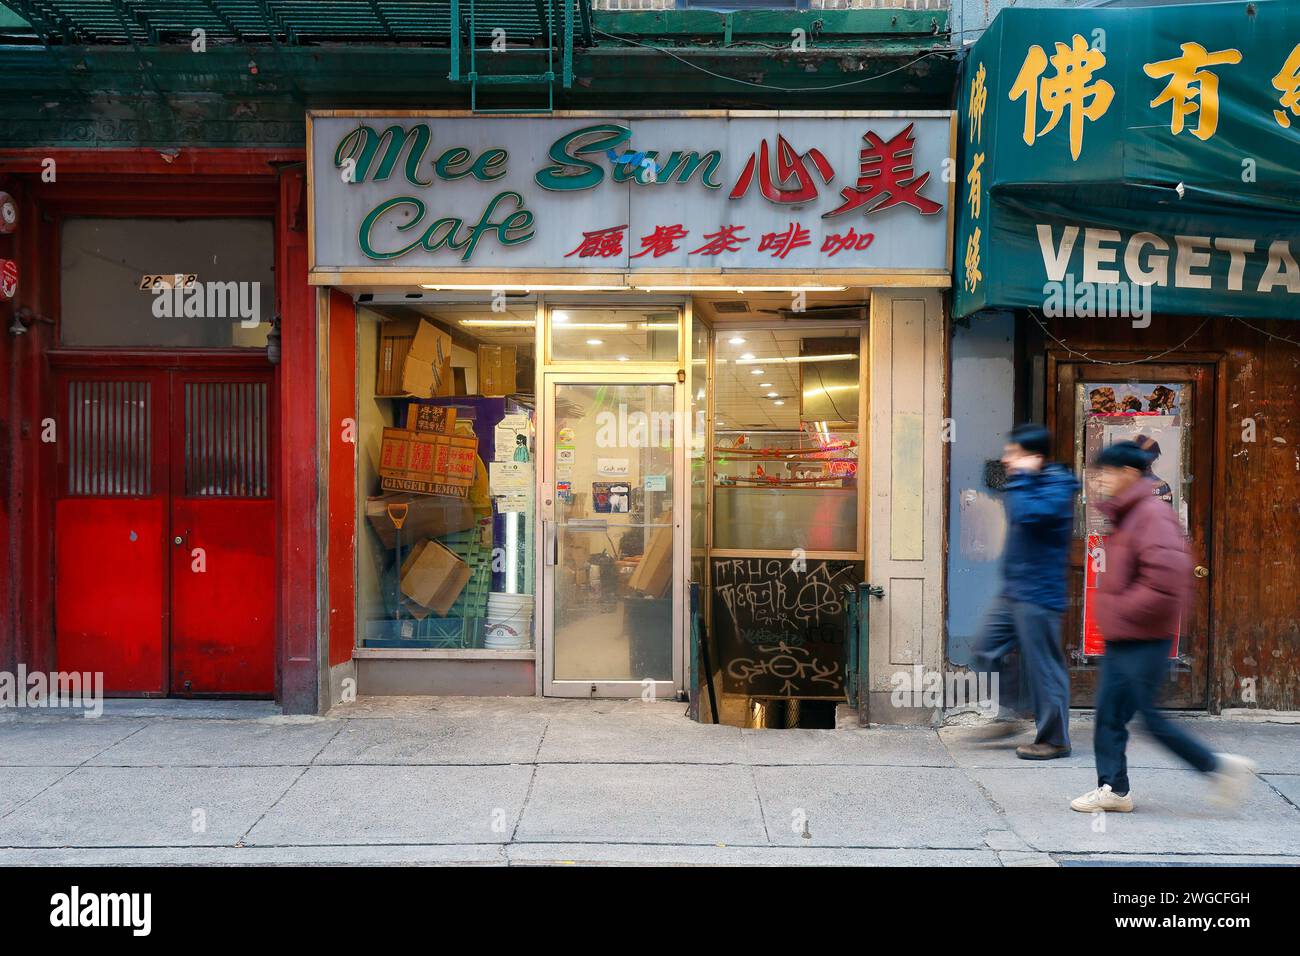 Mee Sum Cafe 美心, 26 Pell St, New York, NY. exterior storefront of a coffee shop in Manhattan's Chinatown. Stock Photo